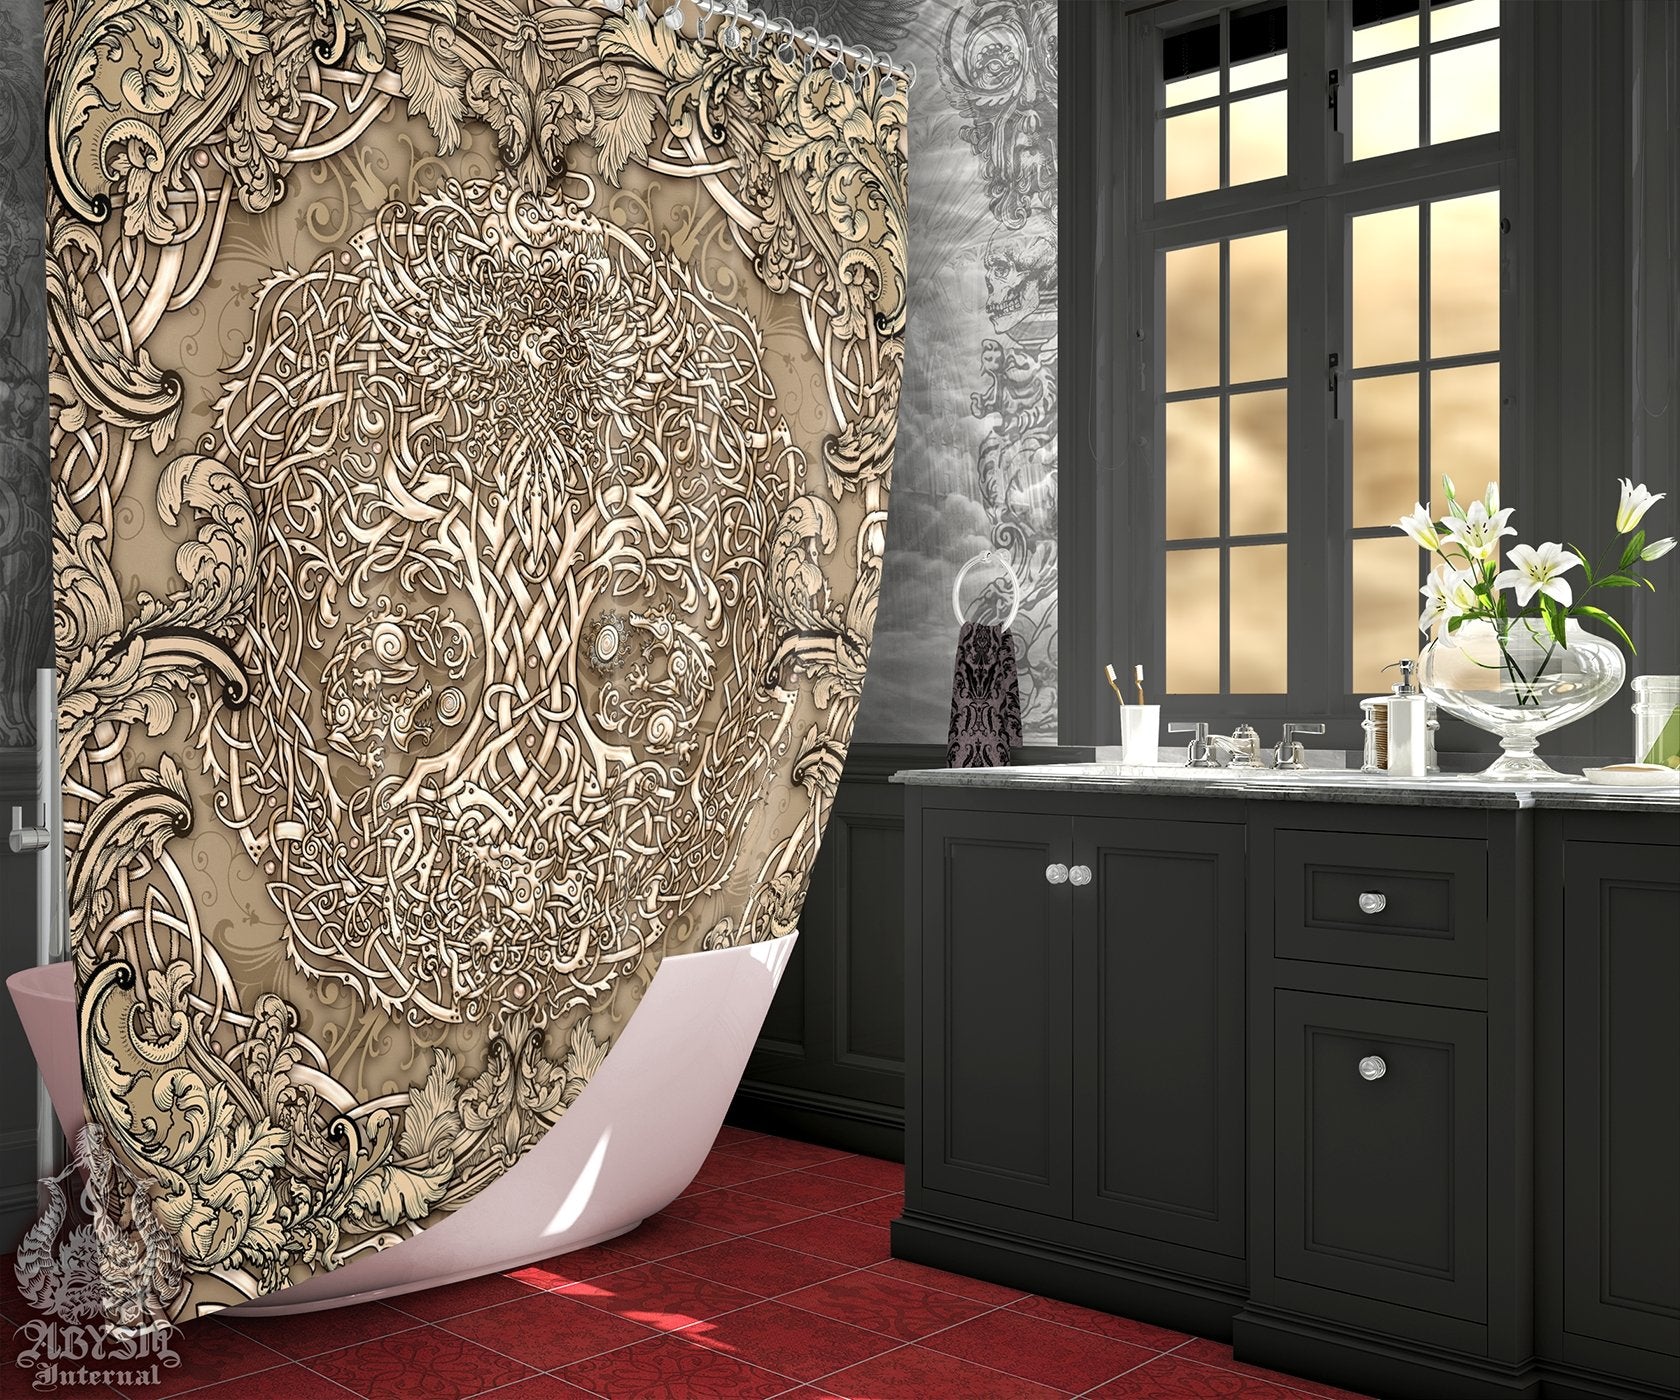 Yggdrasil Shower Curtain, Viking Bathroom Decor, Pagan, Norse Tree of Life, Eclectic and Funky Home - Cream - Abysm Internal